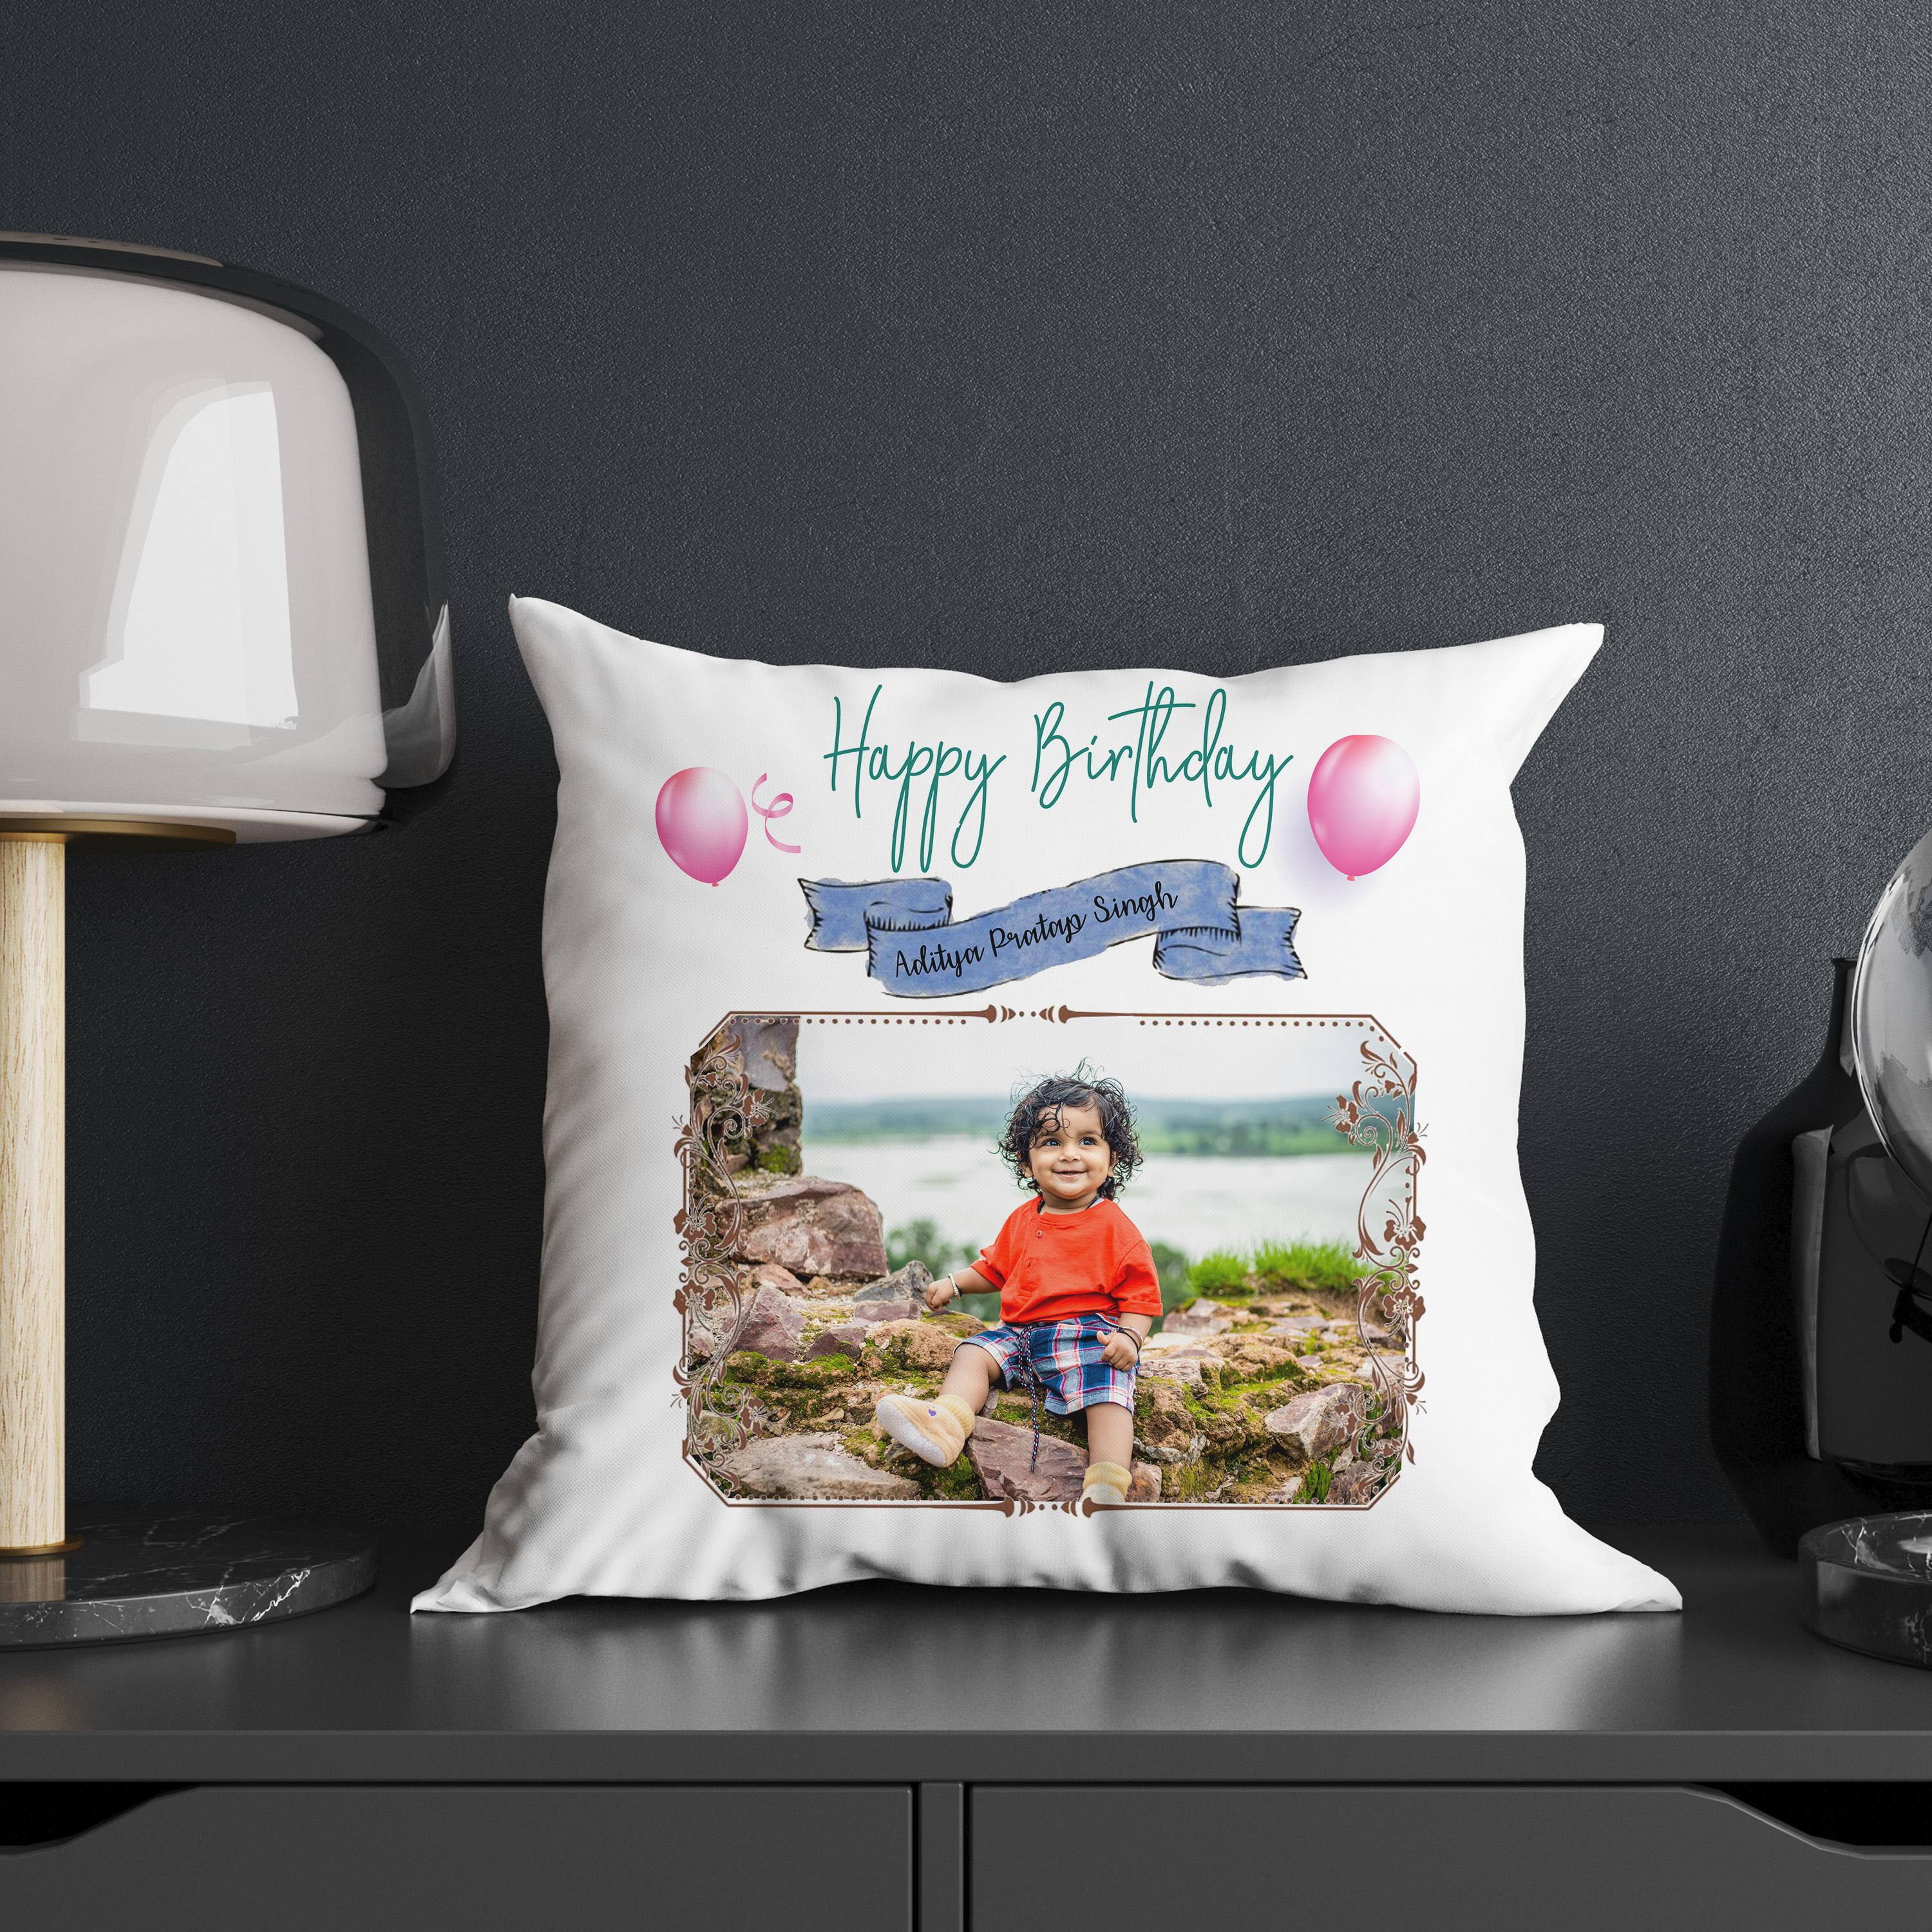 Personalized Gifts for Kids